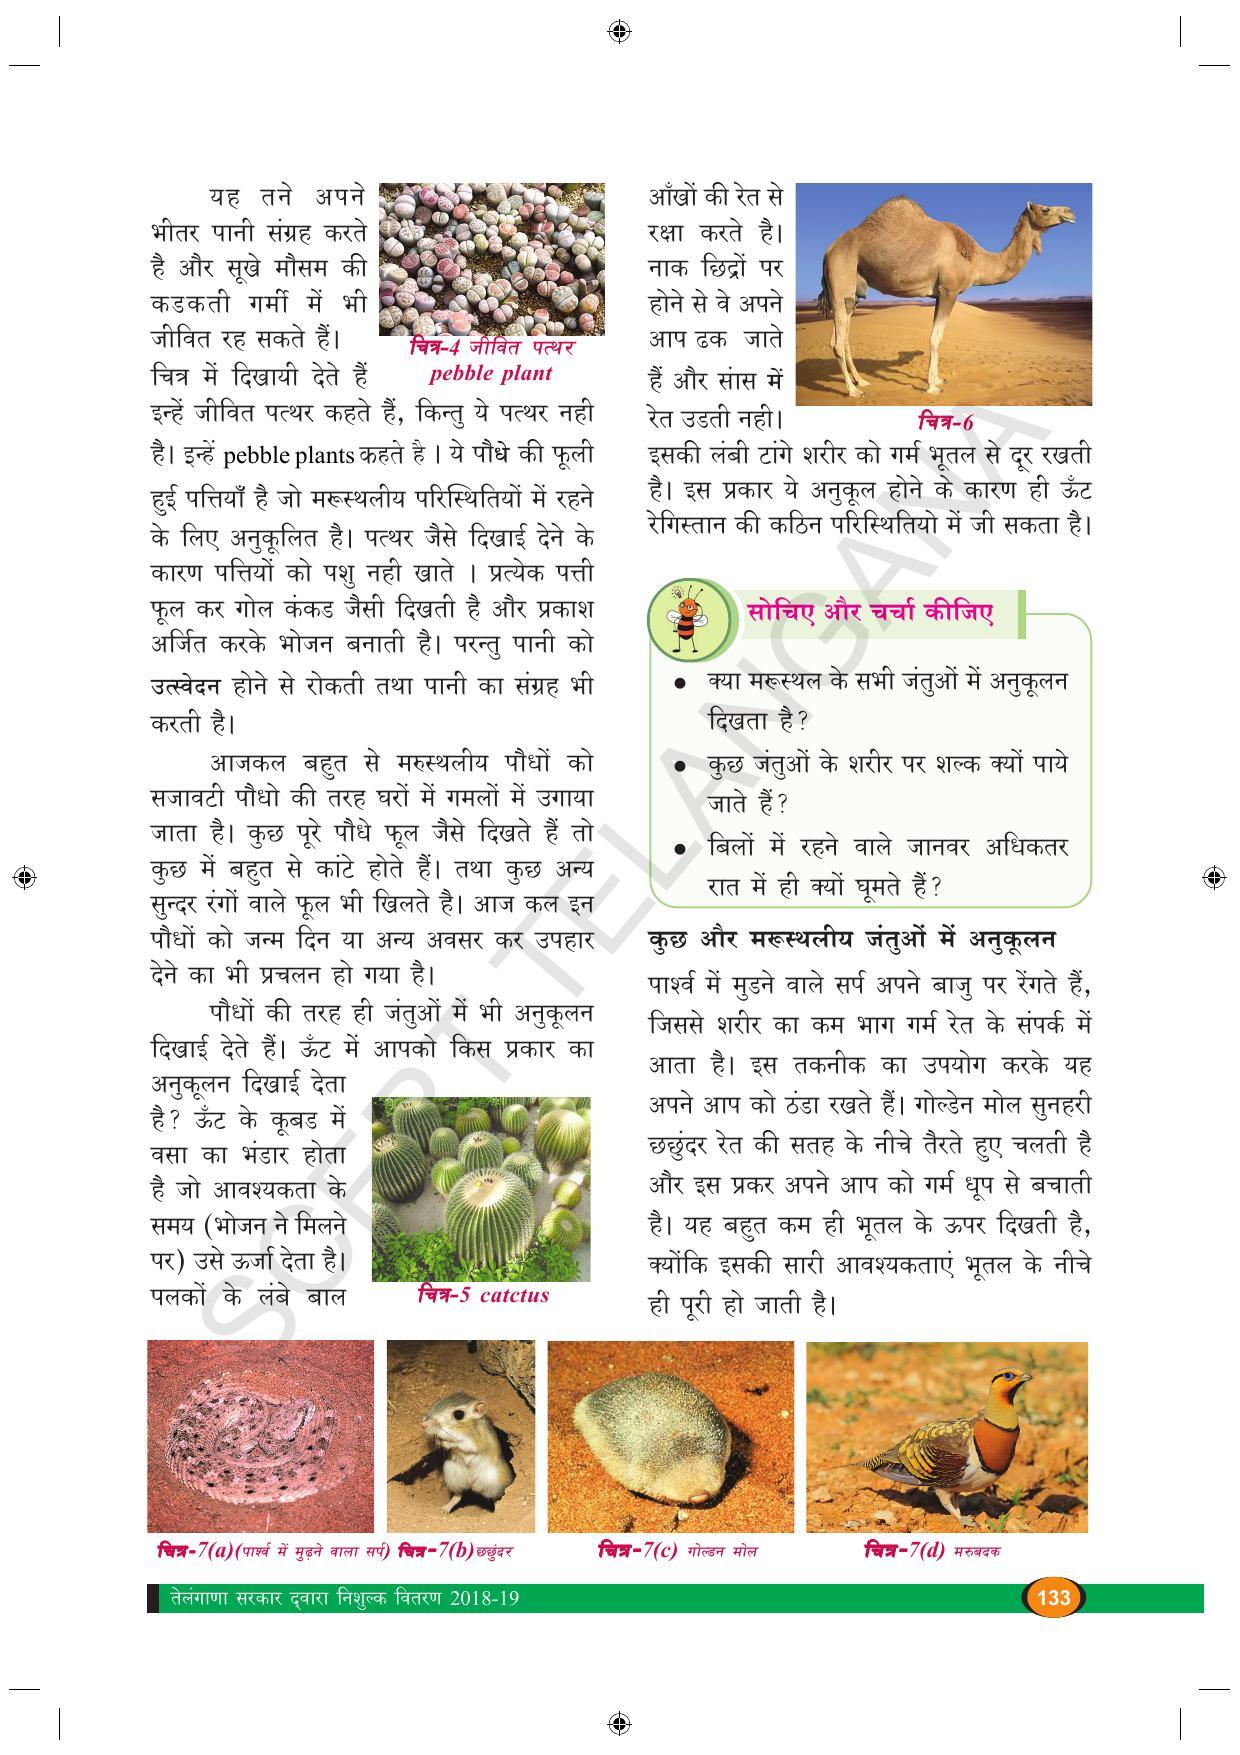 TS SCERT Class 9 Biological Science (Hindi Medium) Text Book - Page 145